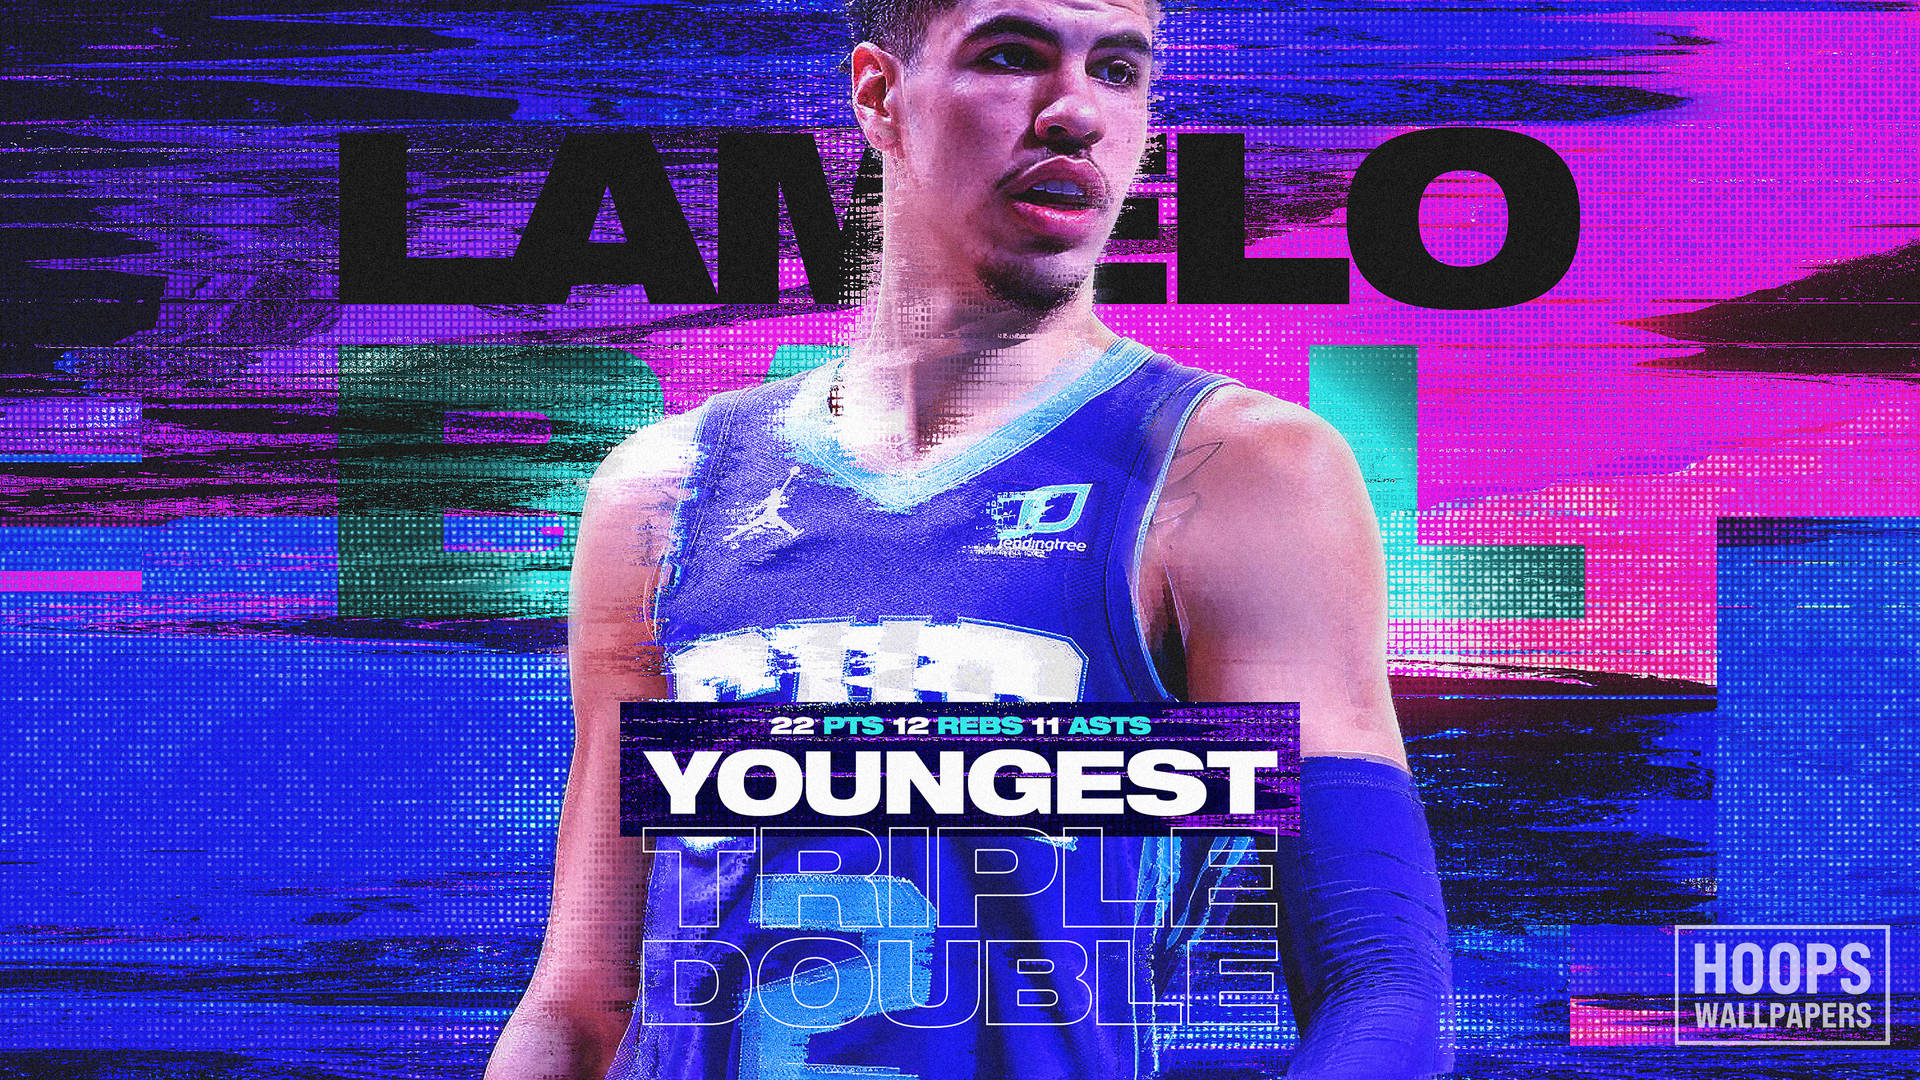 Lamelo Ball In Action During An Nba Game. Wallpaper